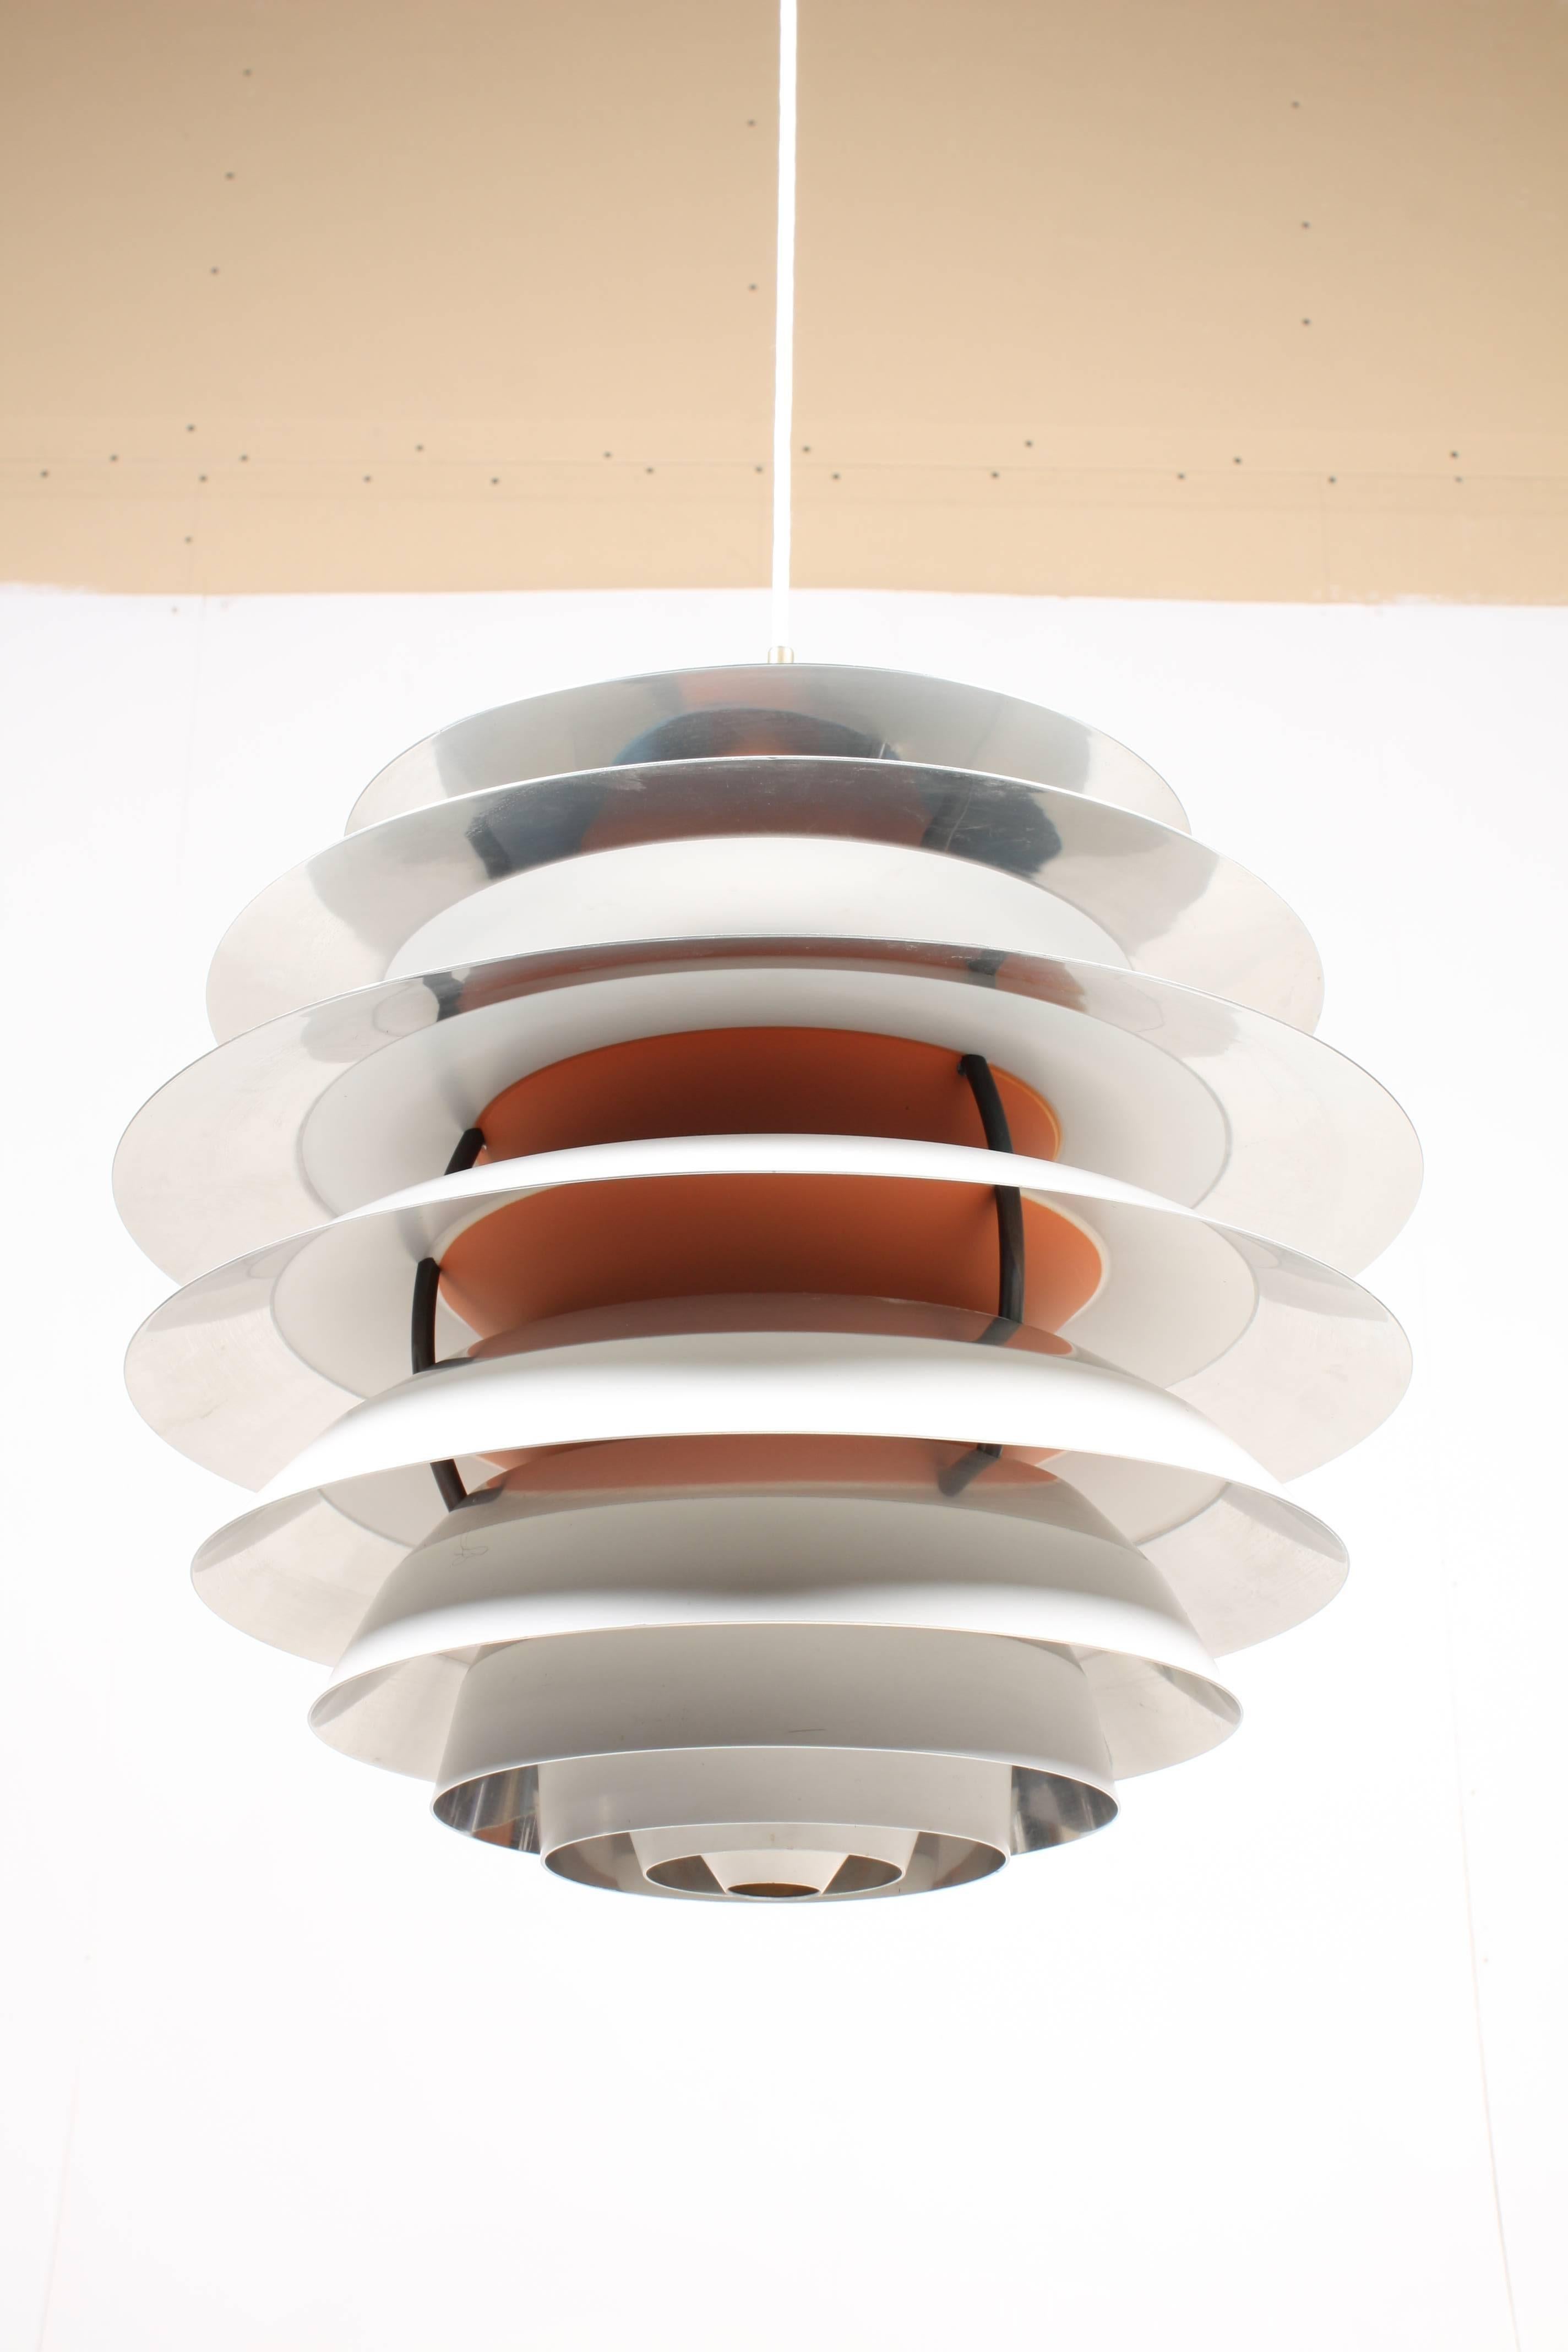 Contrast Pendant by Poul Henningsen In Good Condition For Sale In Lejre, DK